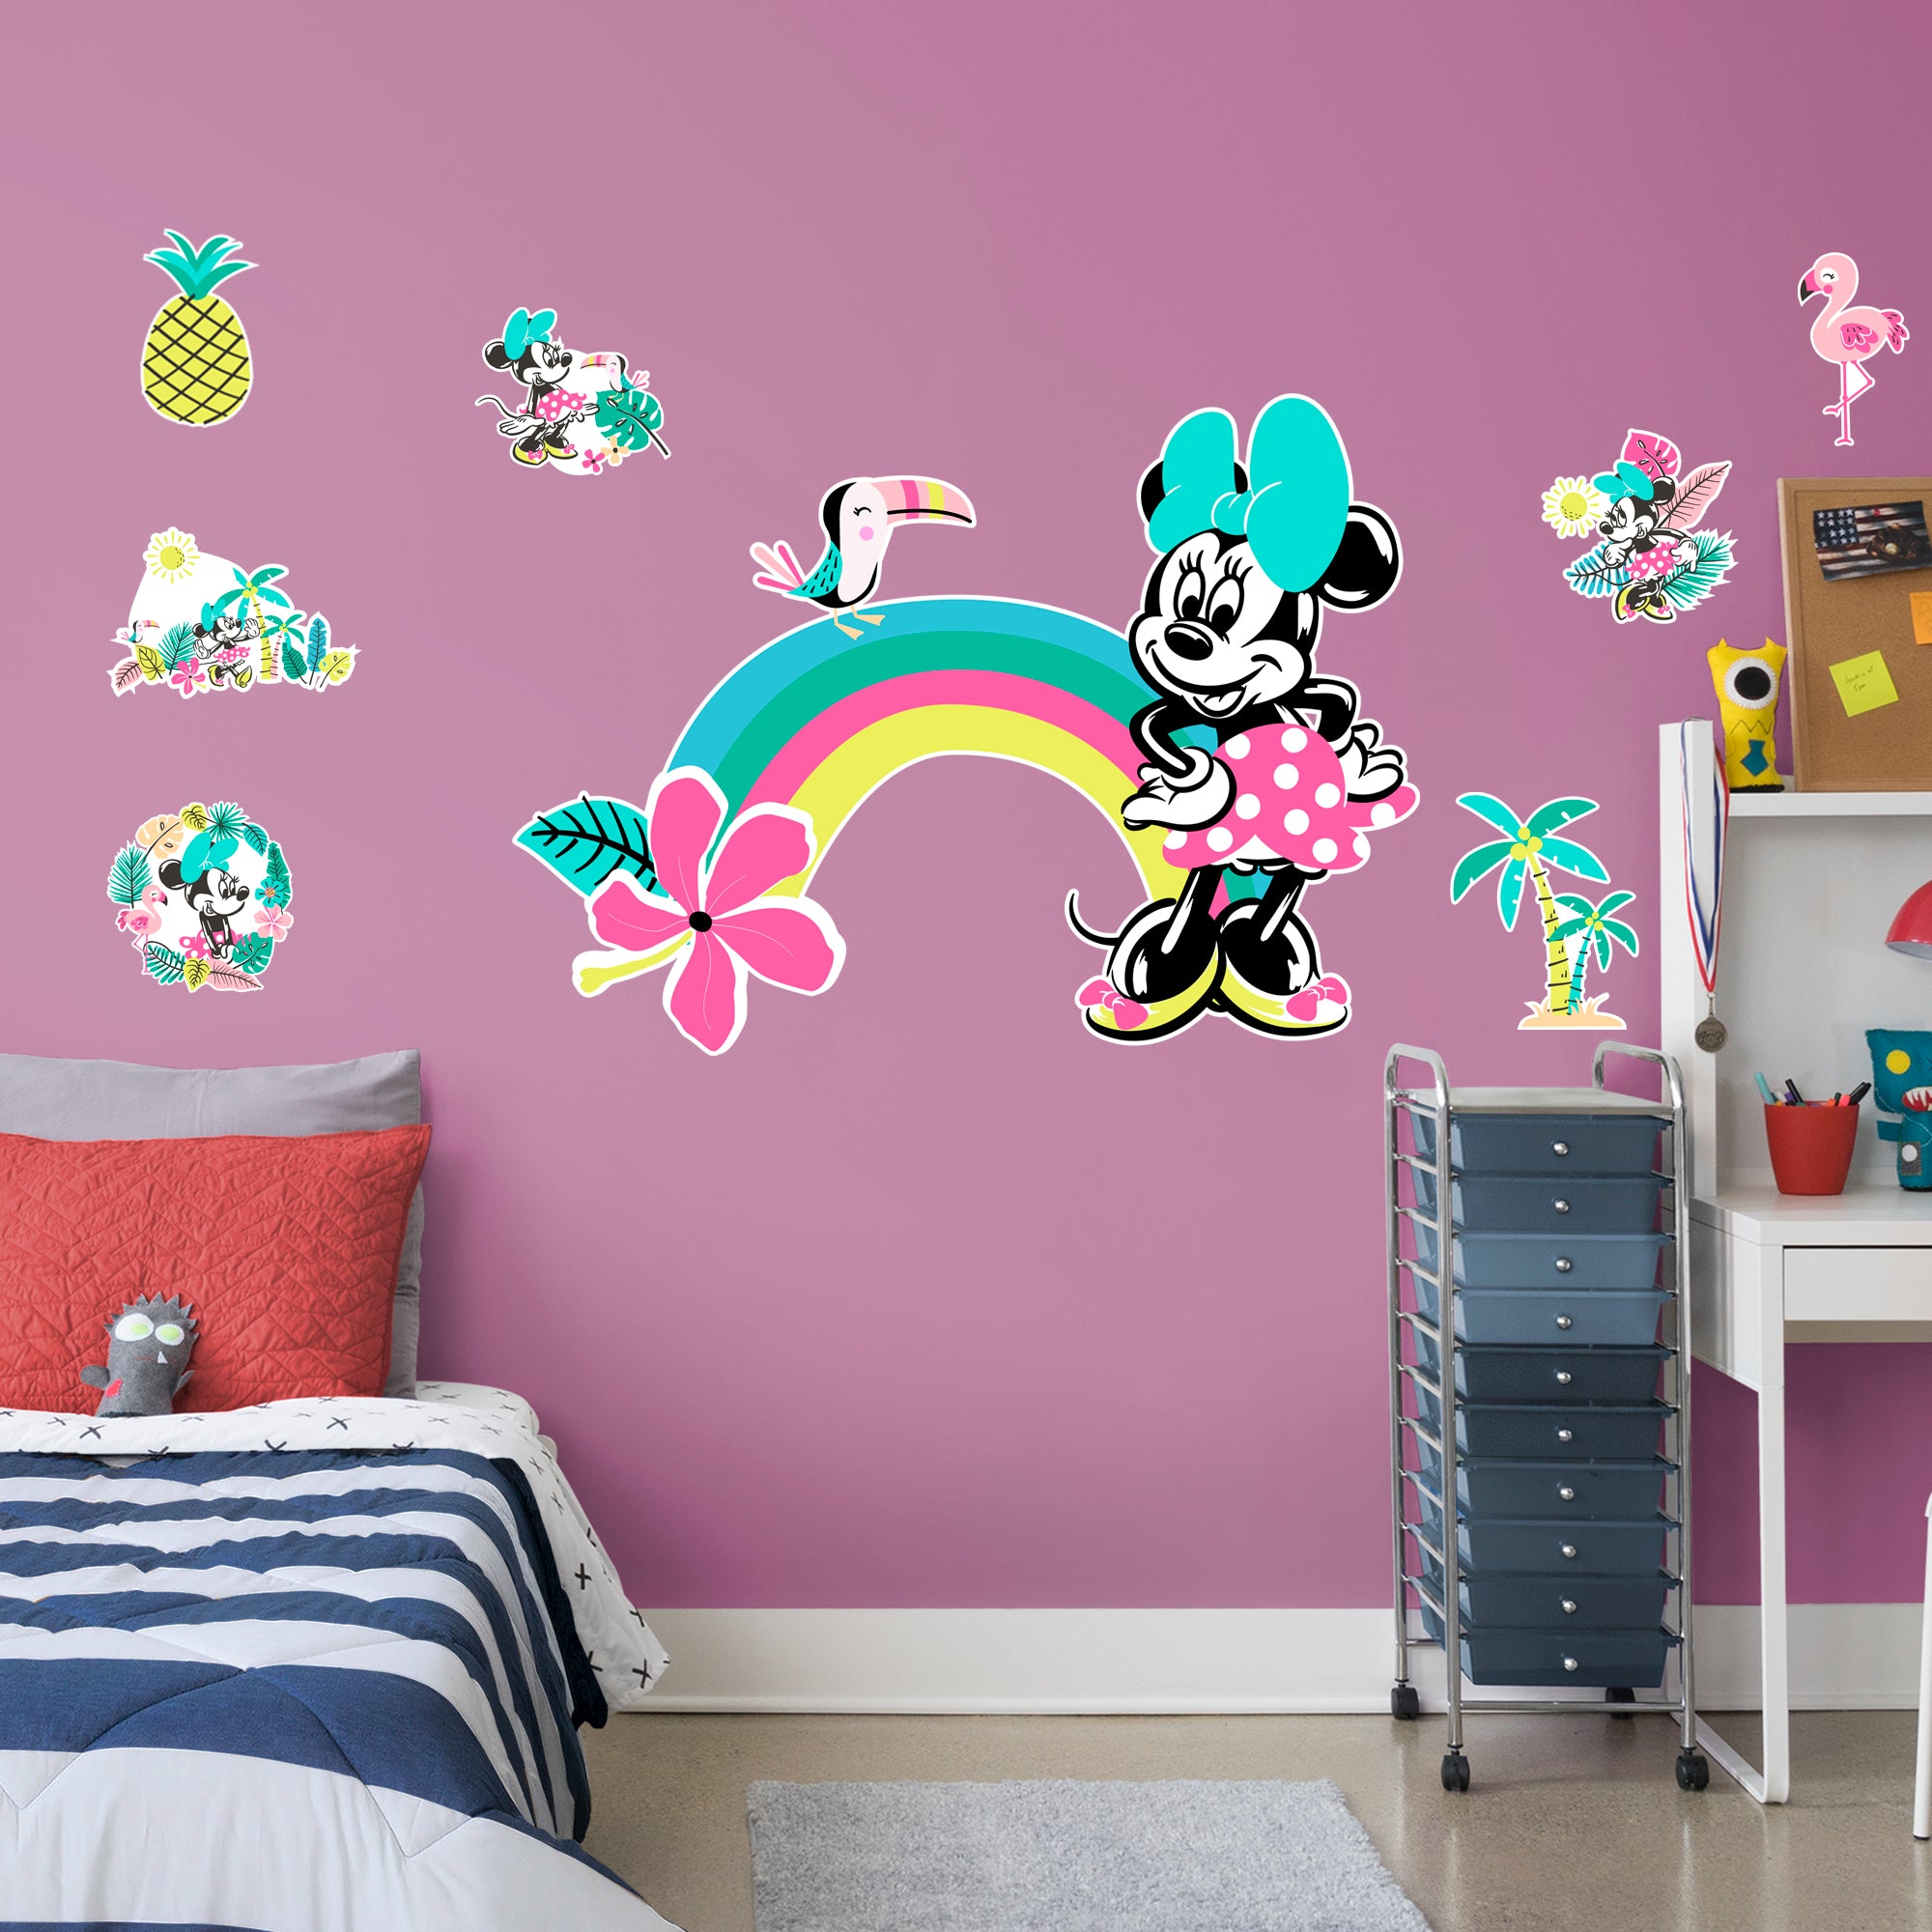 Minnie Mouse Tropical Fun - Officially Licensed Disney Removable Wall Decal Giant Character + 7 Decals (51"W x 37"H) by Fathead